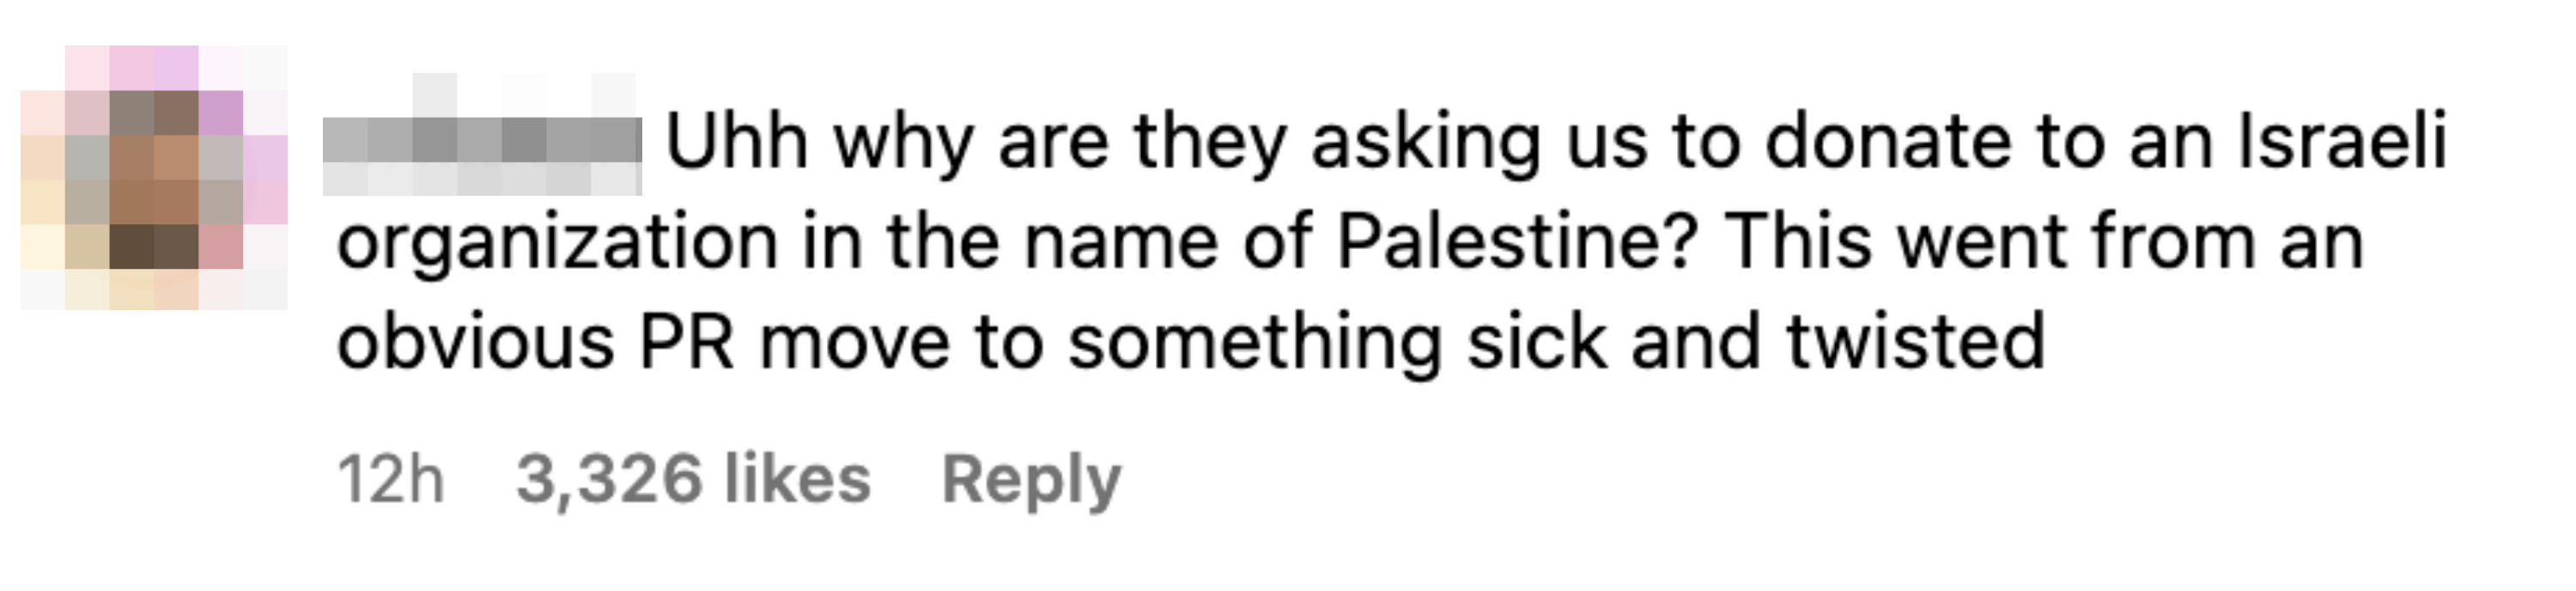 &quot;why are they asking us to donate to an Israeli organization in the name of Palestine? This went from an obvious PR move to something sick and twisted&quot;